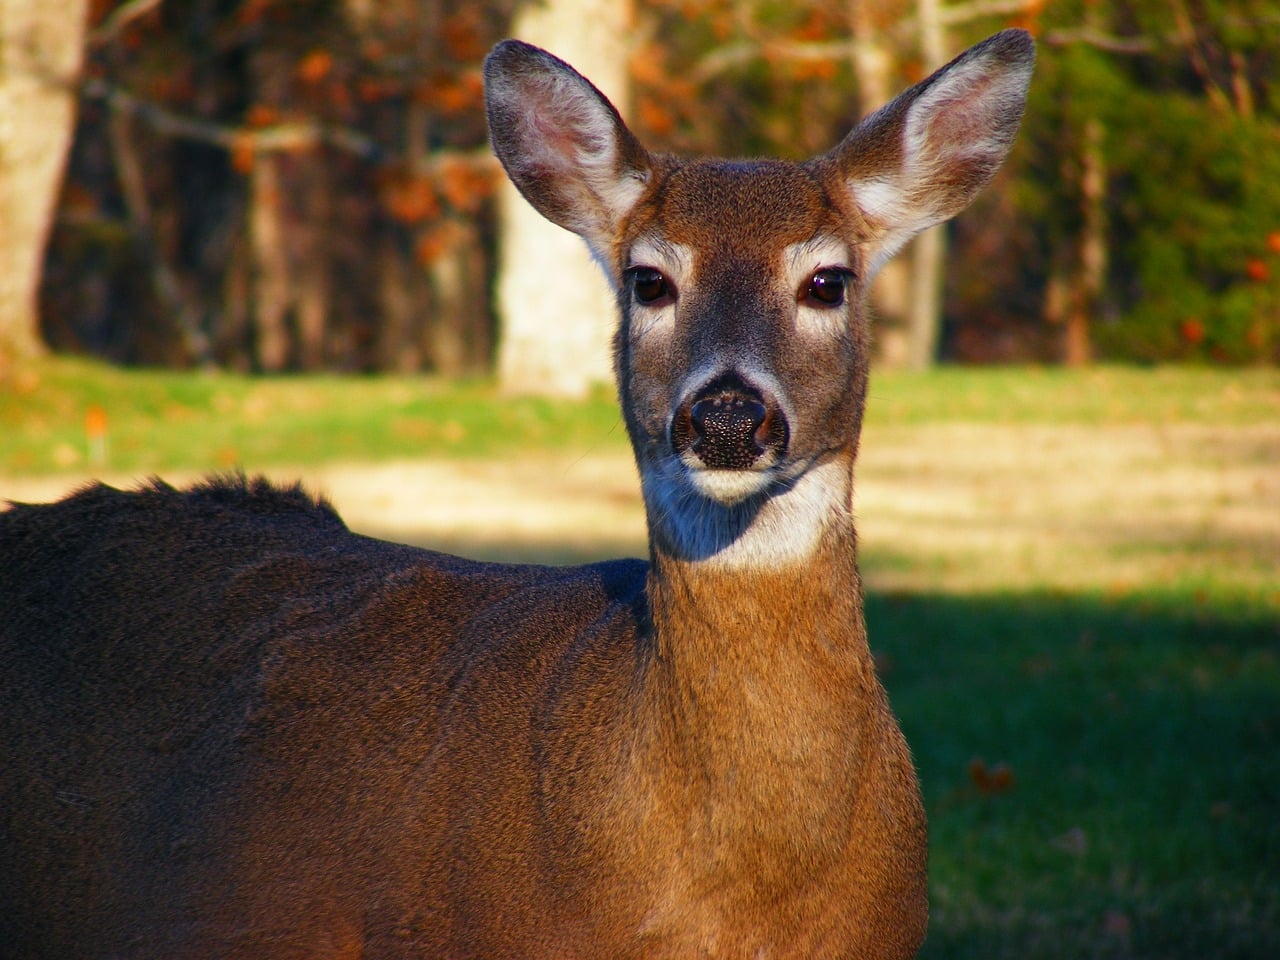 A deer in Green River Lake State Park, Kentucky, USA 